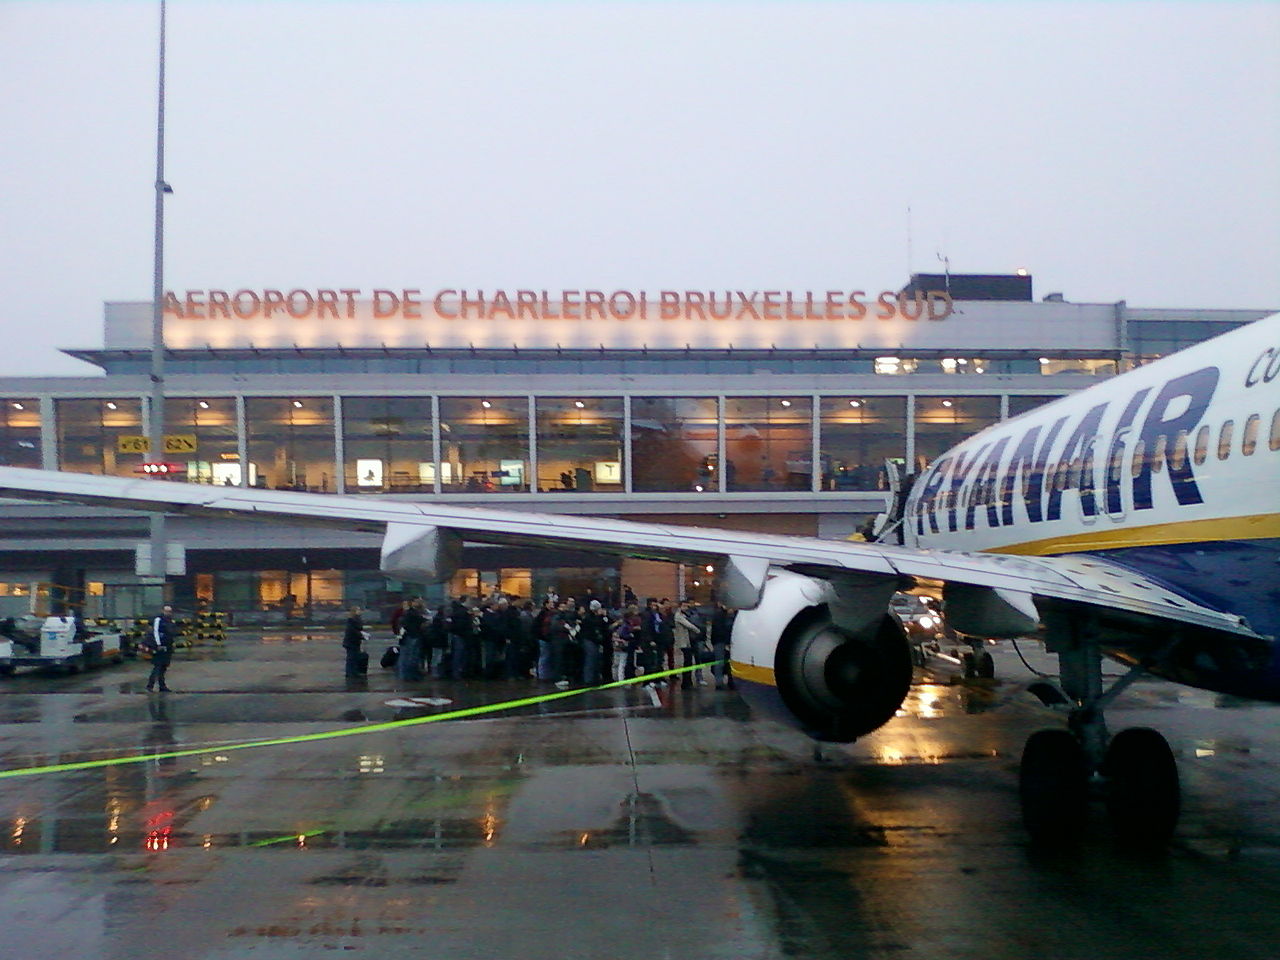 A Ryanair aircraft parked at Brussels South Charleroi Airport.